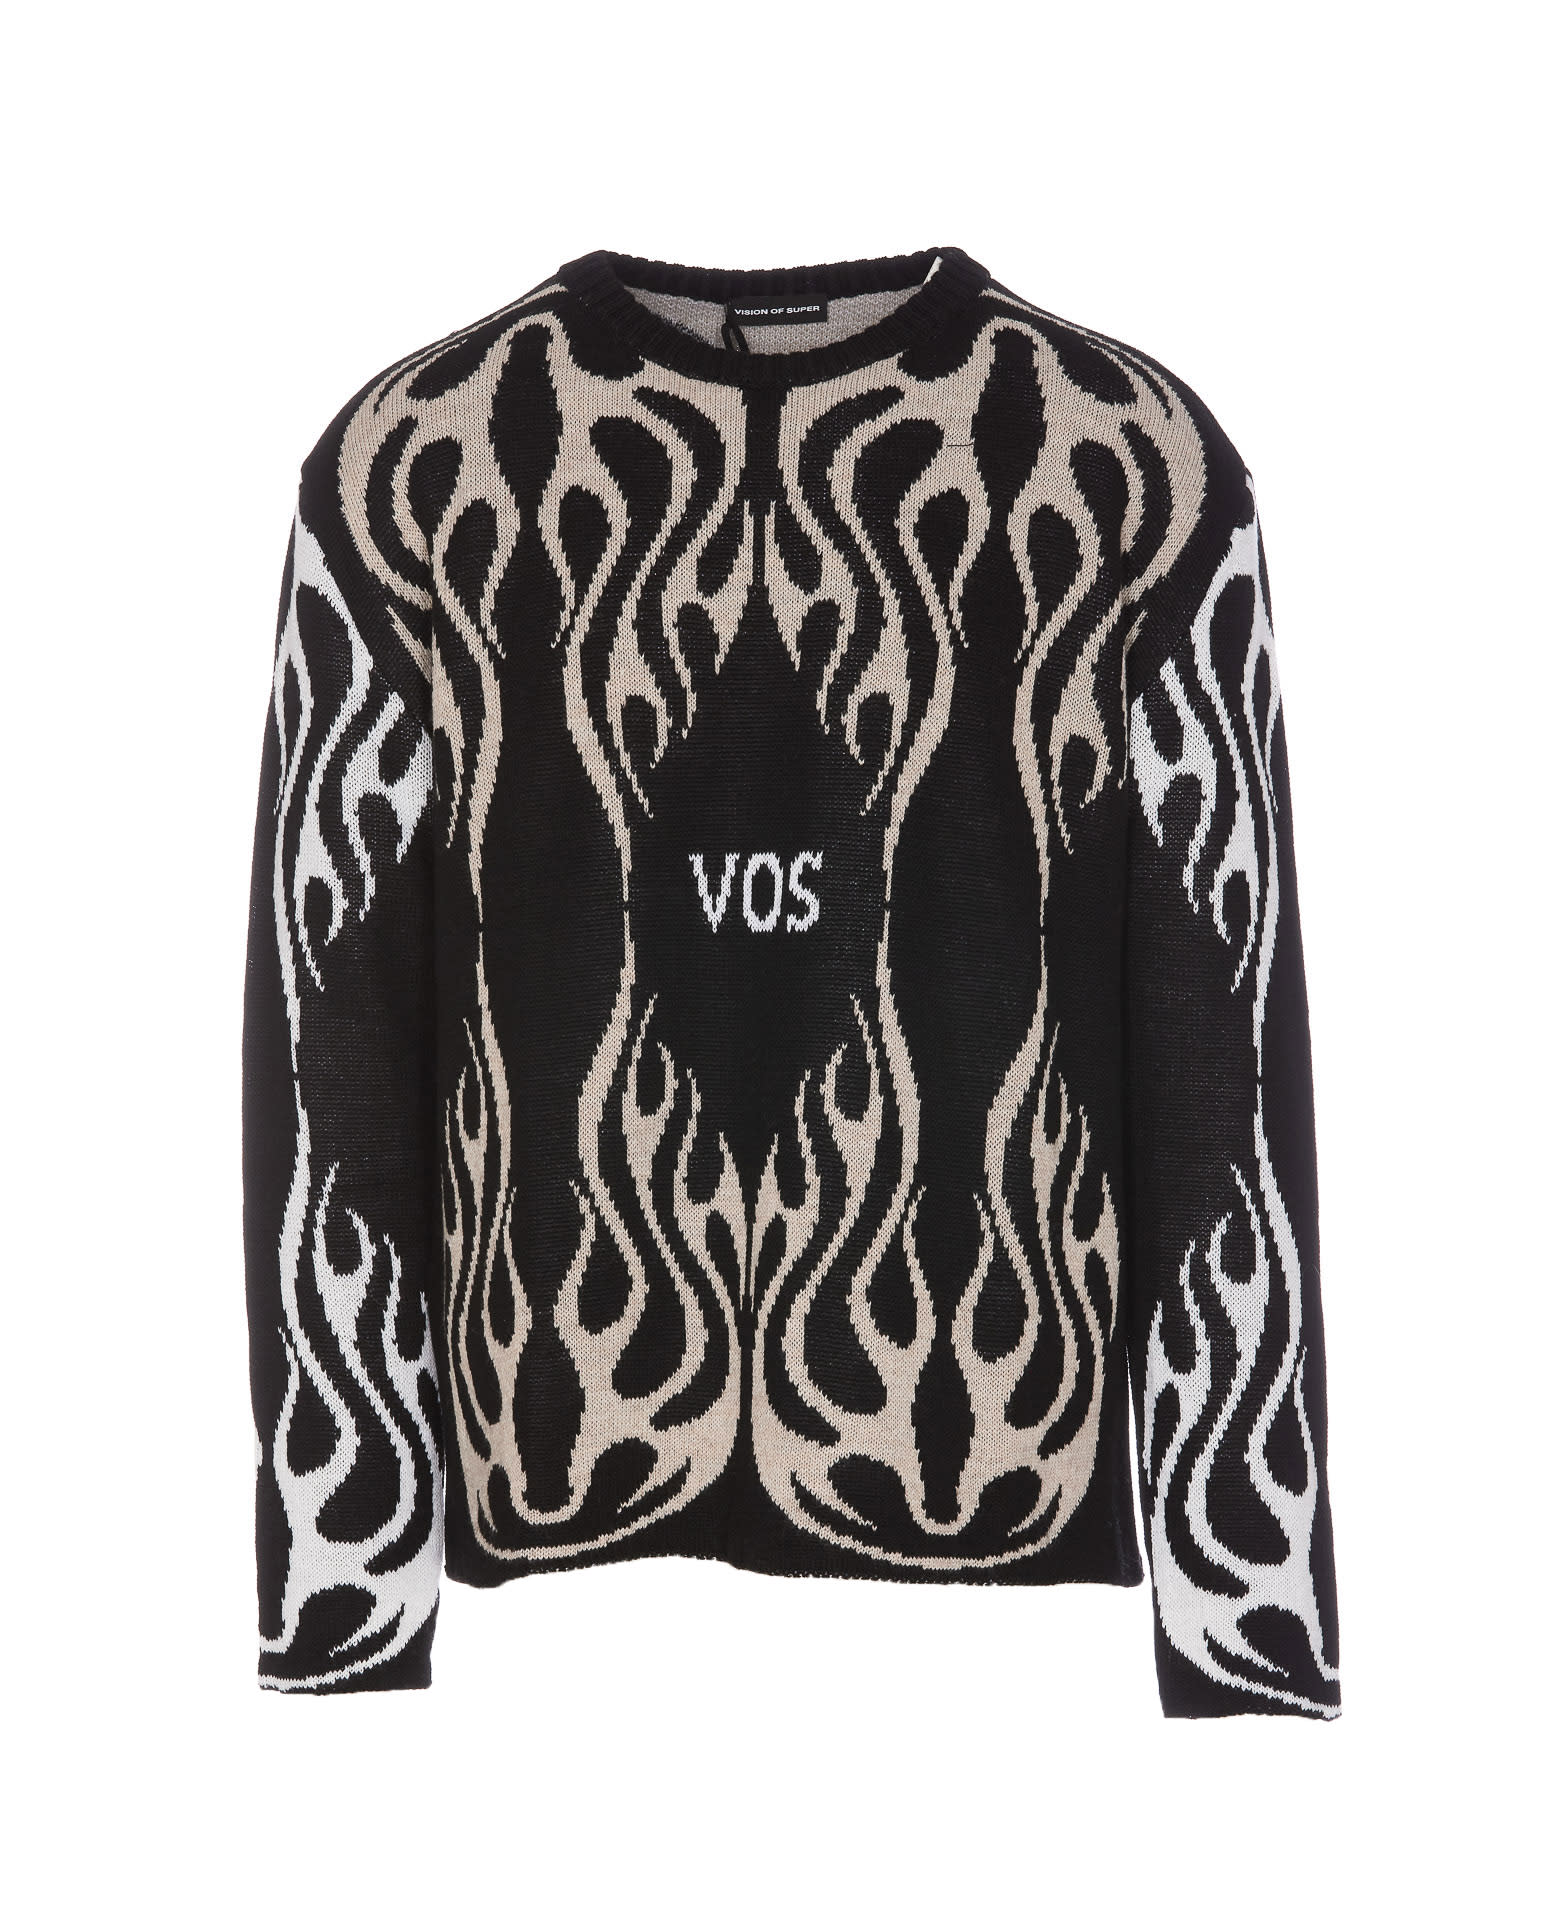 VISION OF SUPER SWEATER WITH LOGO AND FLAMES